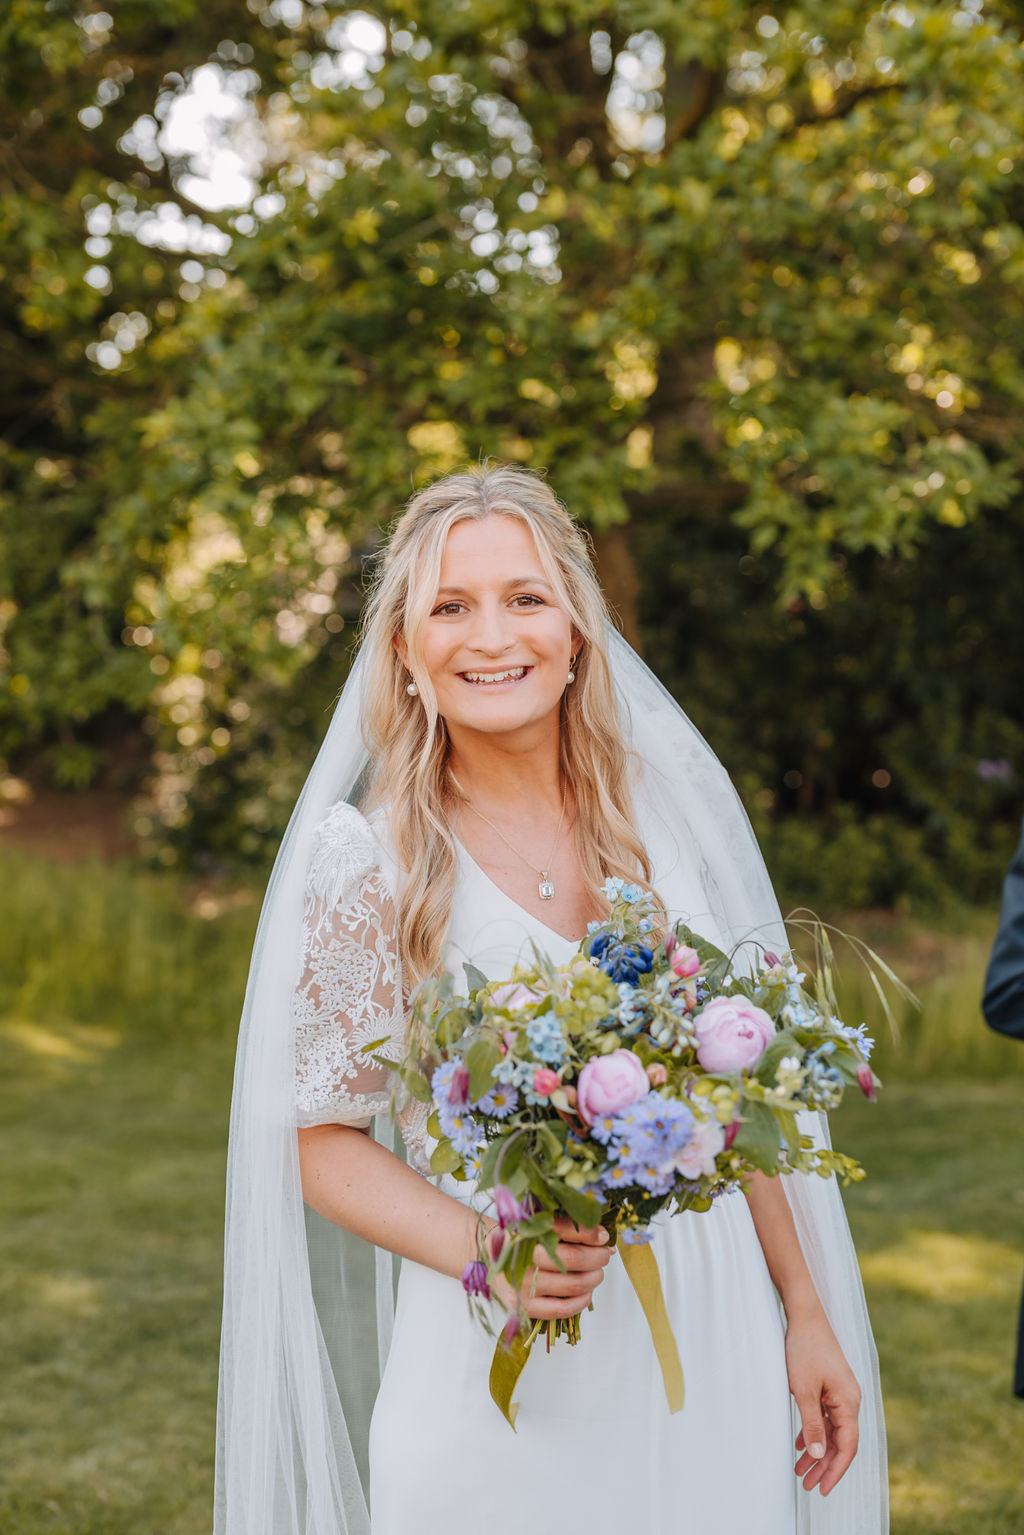 A bride wearing a white wedding dress with lace sleeves and a pastel toned bouquet wears her hair down under a long tulle veil and smiles at the camera